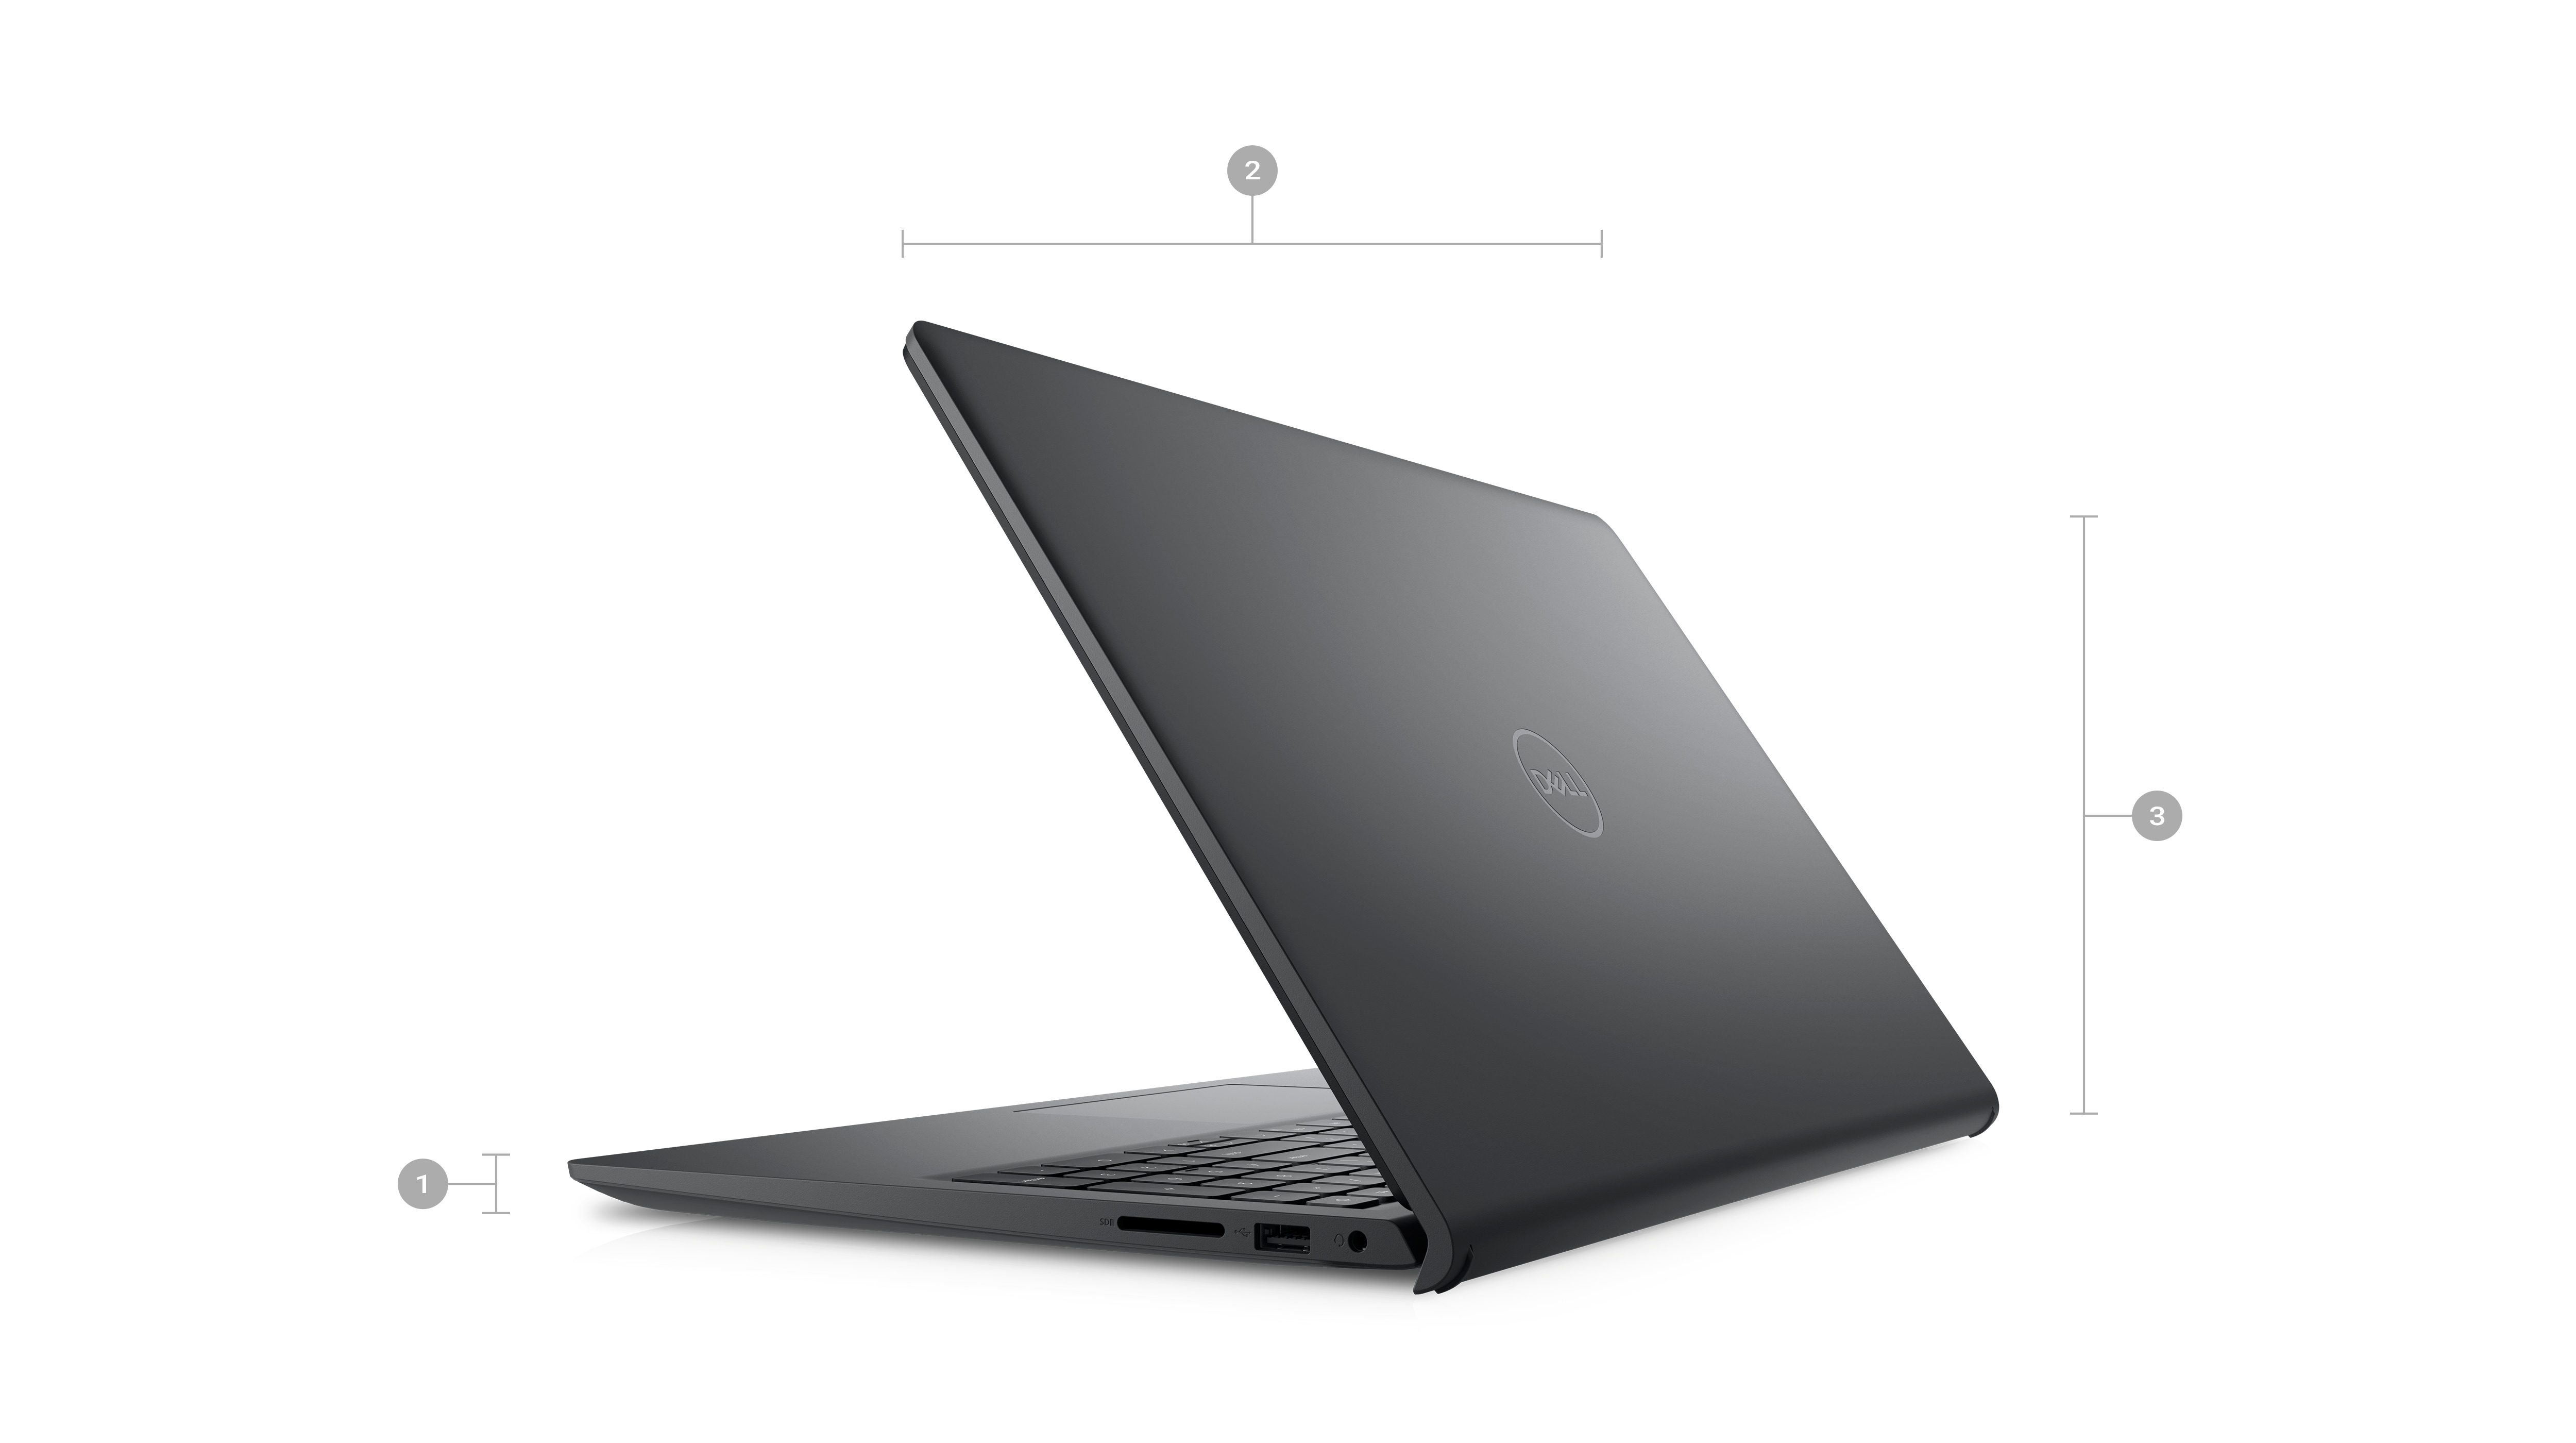 Picture of a Dell Inspiron 15 3521 laptop with its back visible and numbers from 1 to 3 signaling product dimensions & weight.